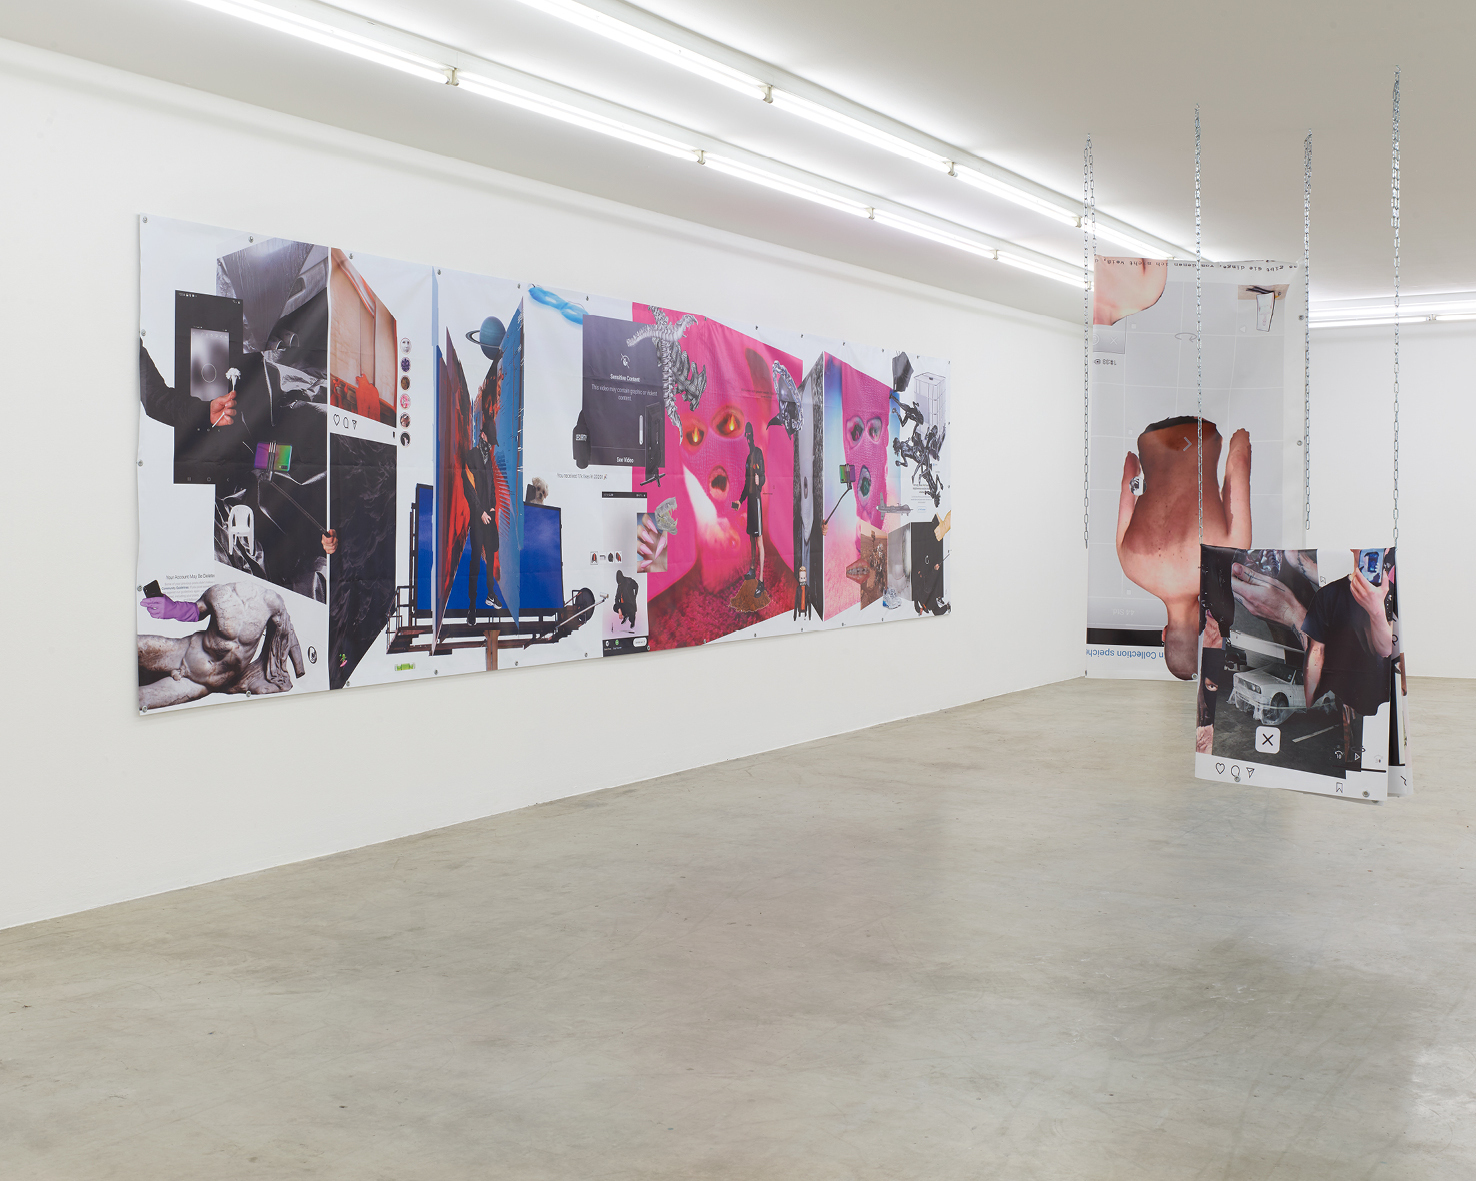 Fleckstein/Dworczyk, Witness to the (digital) world, 2020/21. A series of screenshot-compositions (digital print on PVC banner 1,7 x 6,4 m and 1,7 x 3,2 m folded as objects).